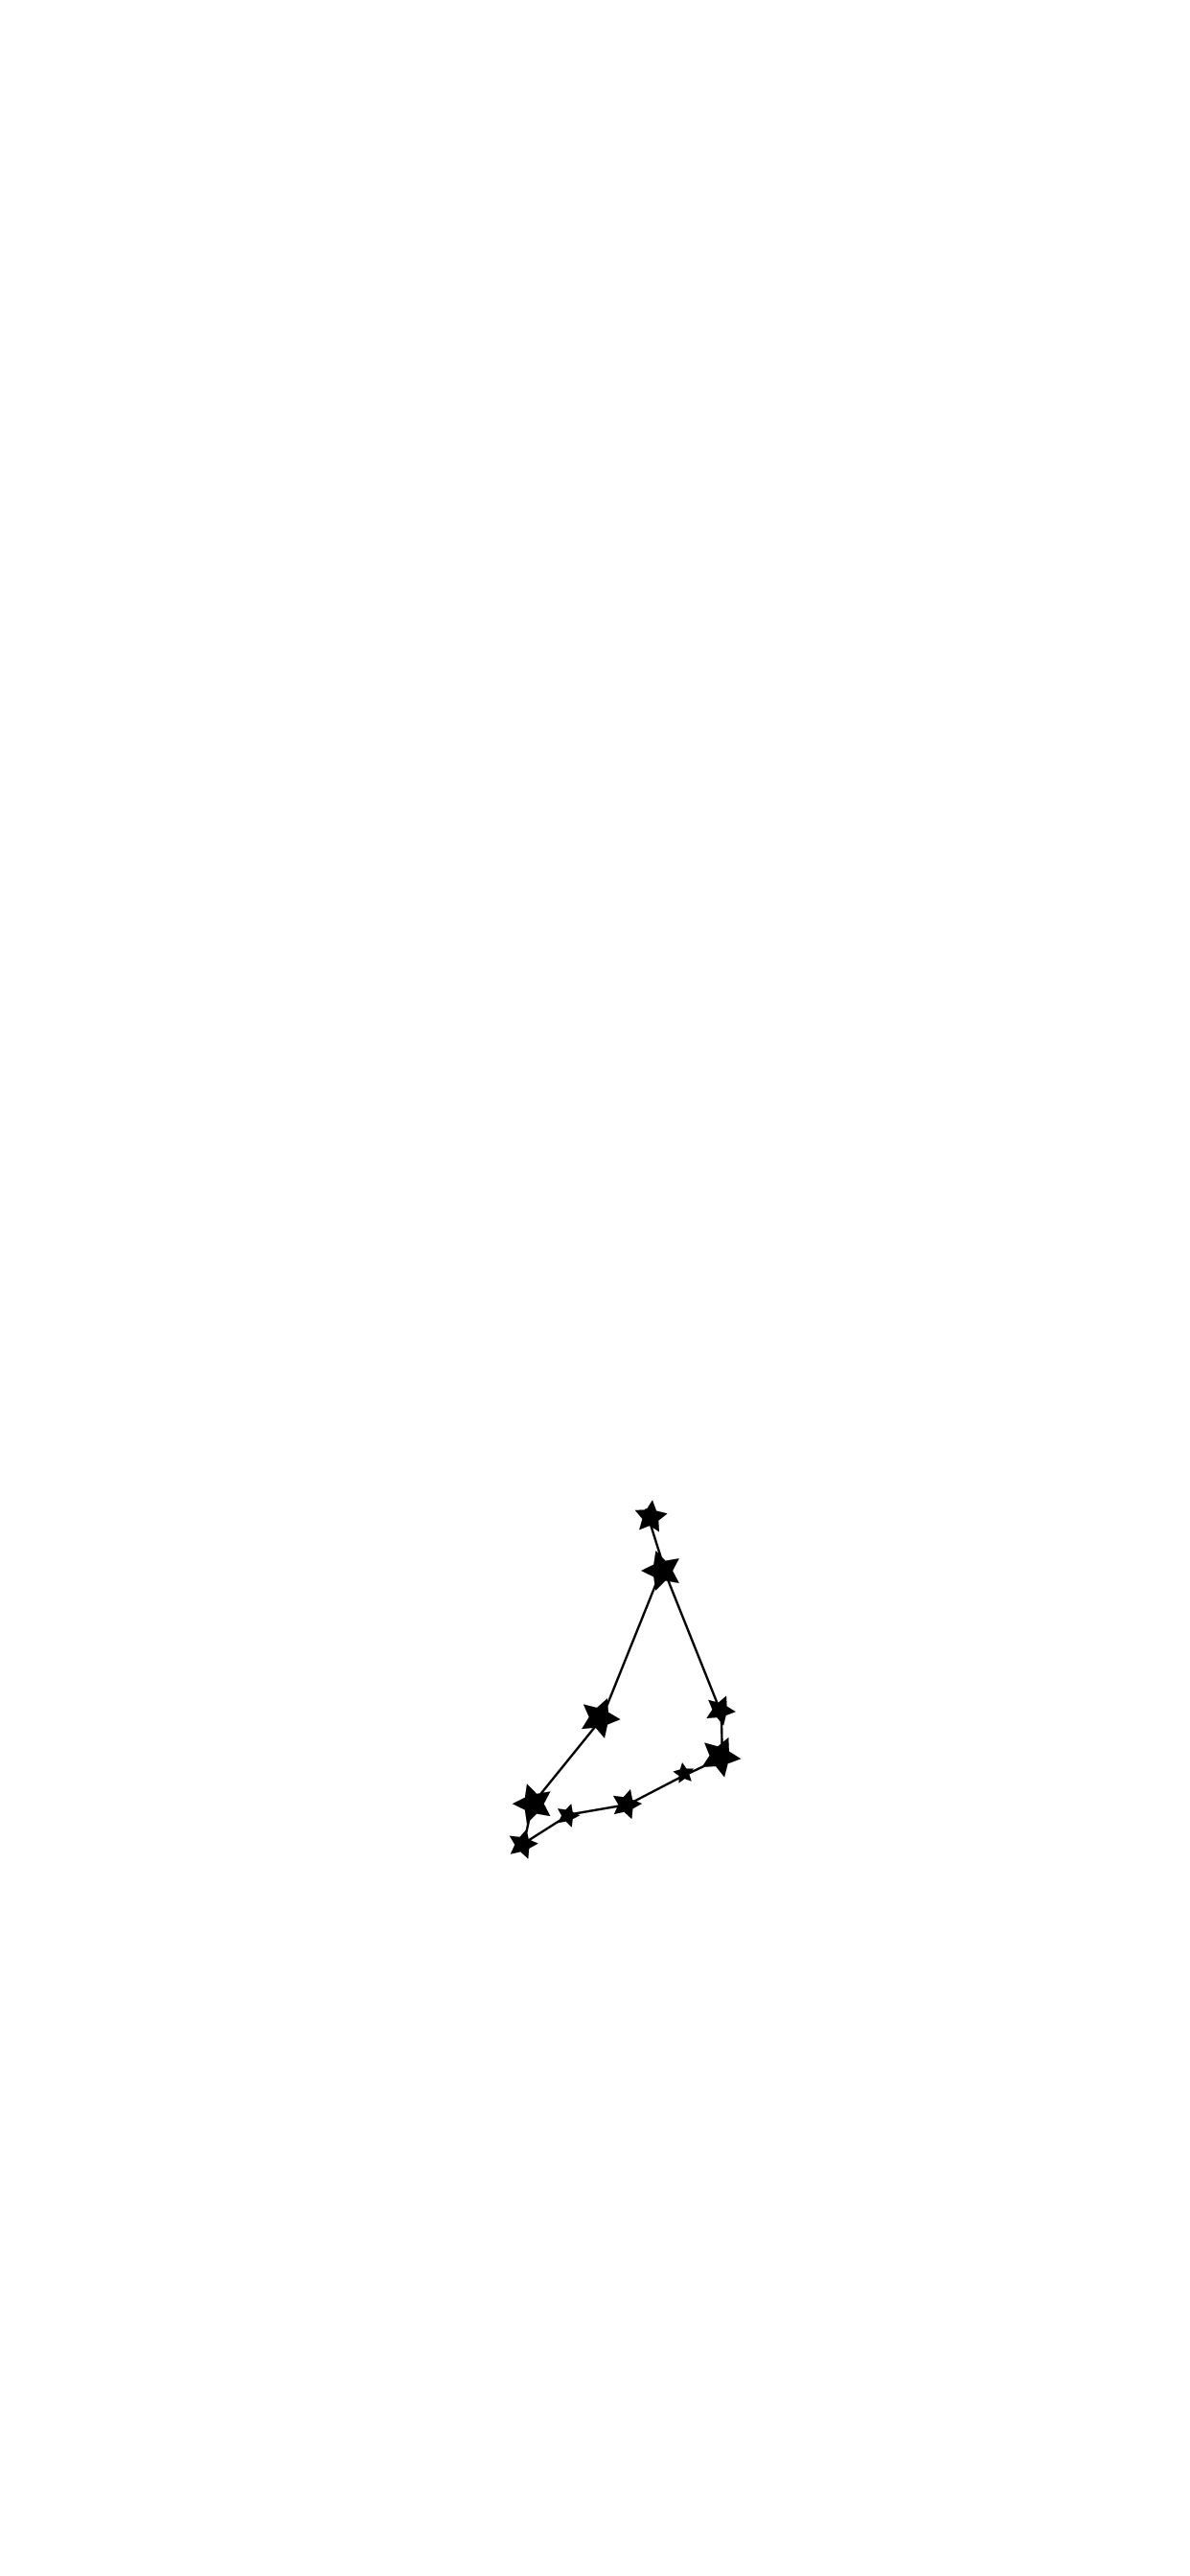 A triangle with lines and dots - Capricorn